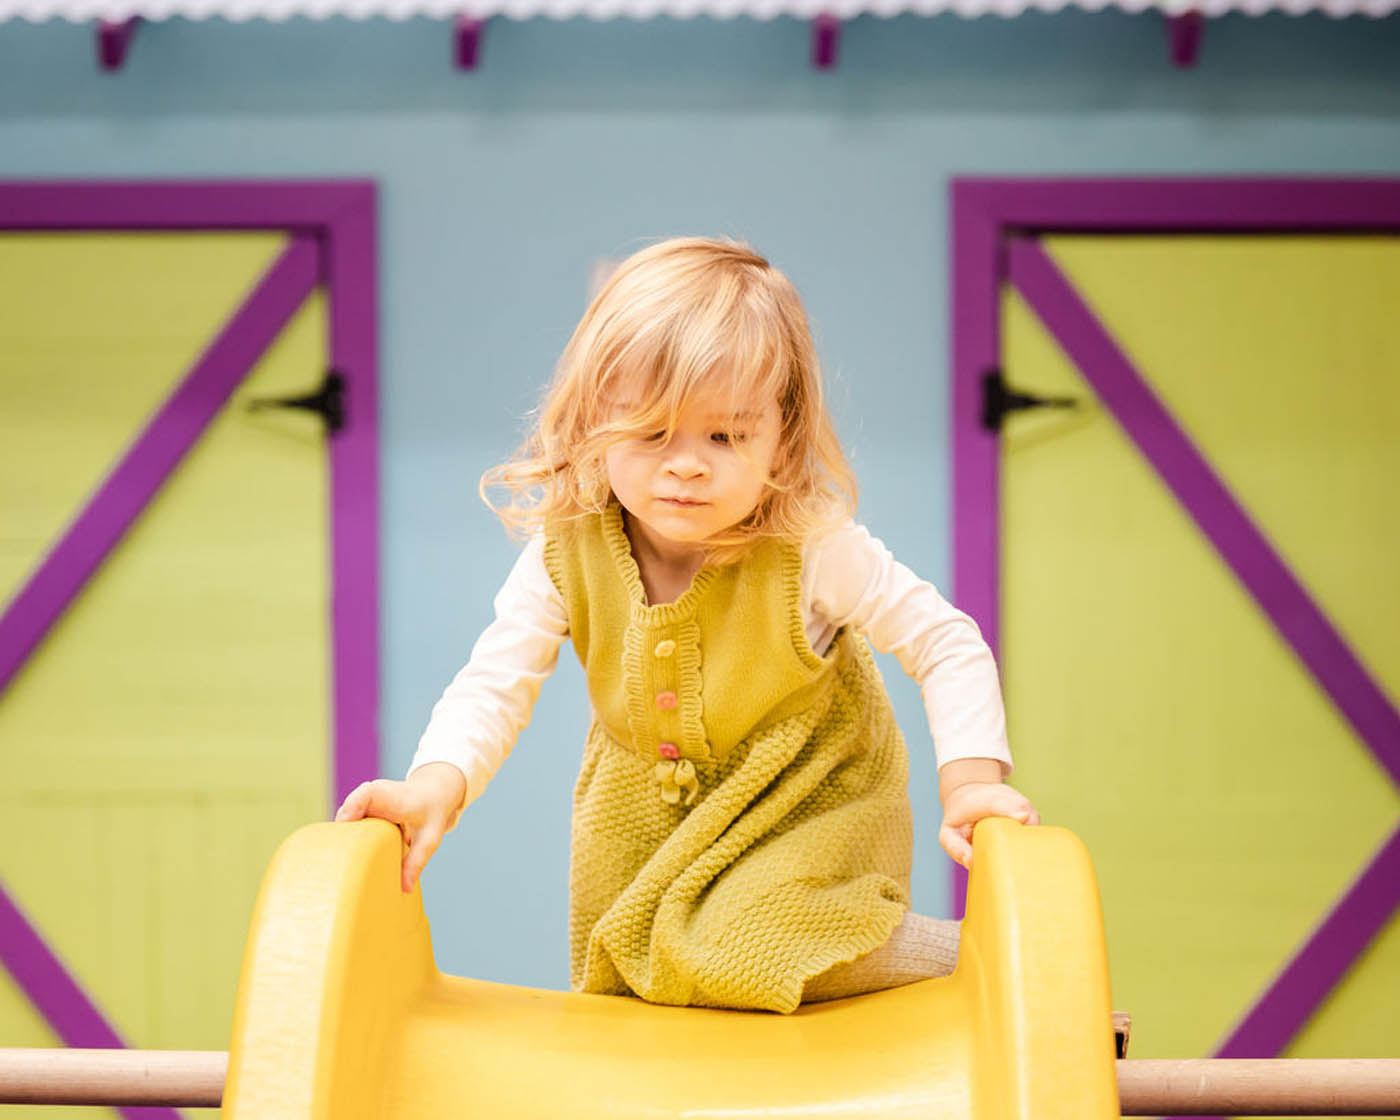 A toddler playing on a yellow slide at Romp n' Roll Midlothian's classes for 3 year olds in Midlothian, VA